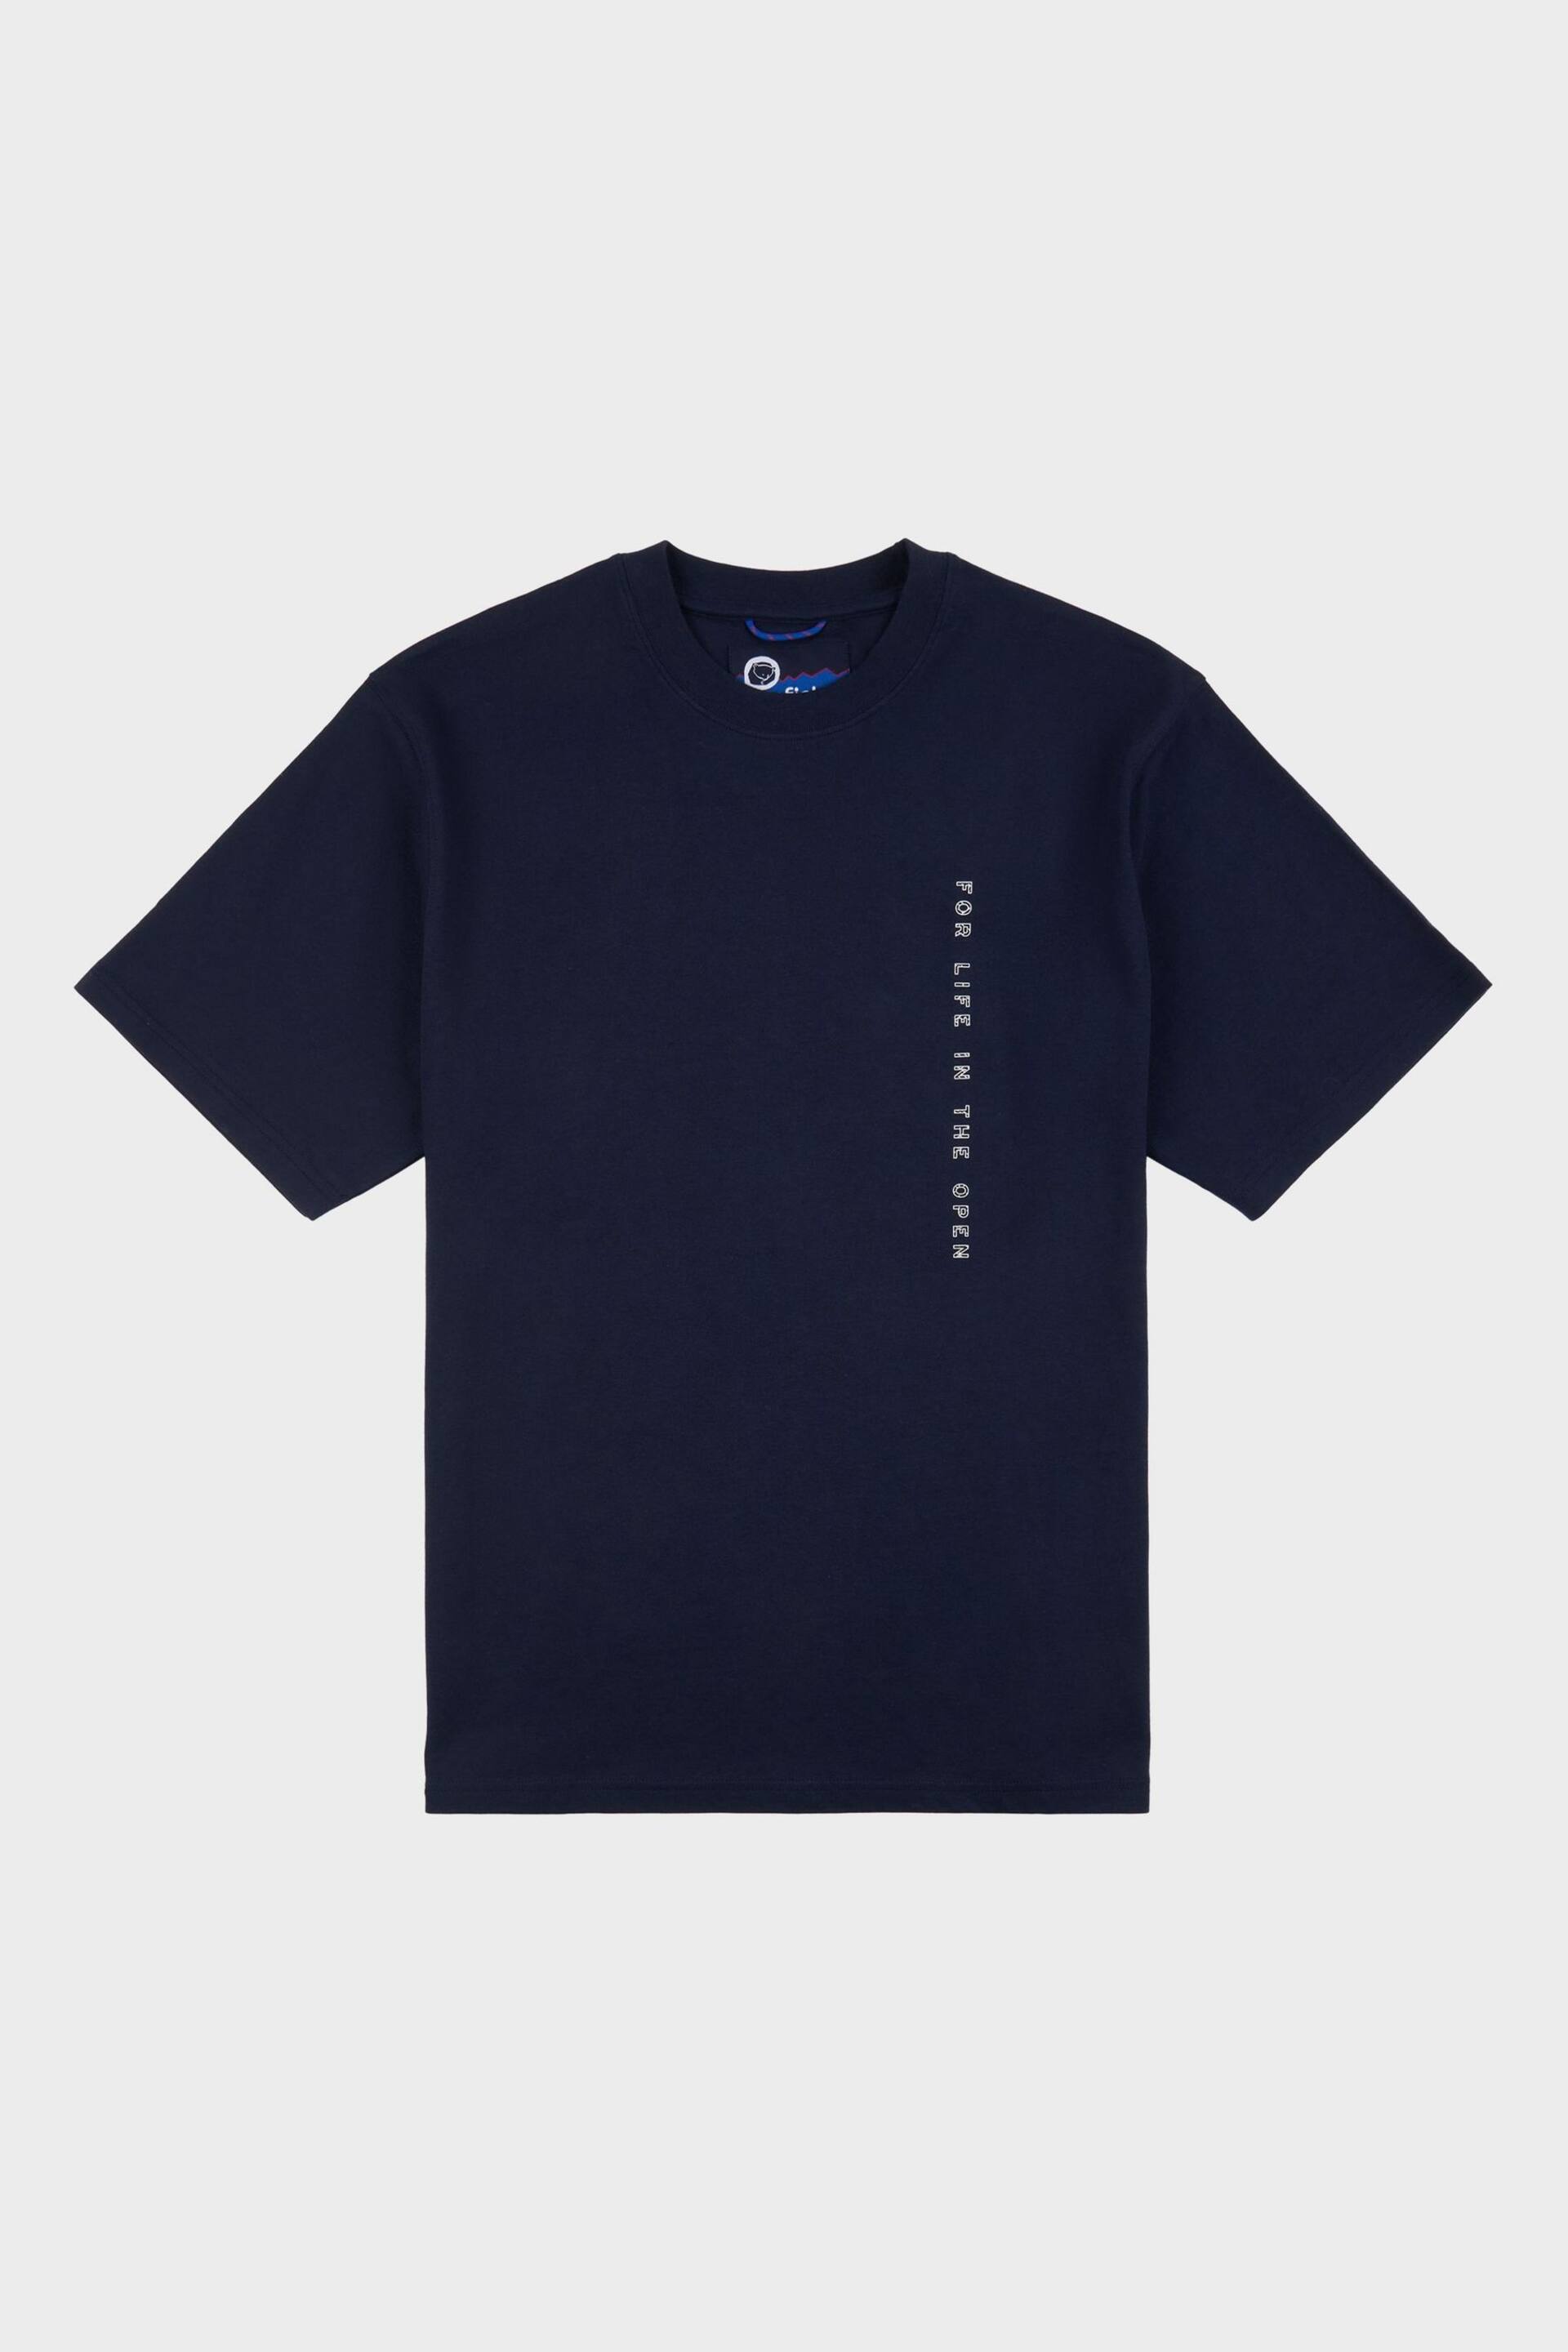 Penfield Mens Relaxed Fit Blue For Life In The Open T-Shirt - Image 7 of 10